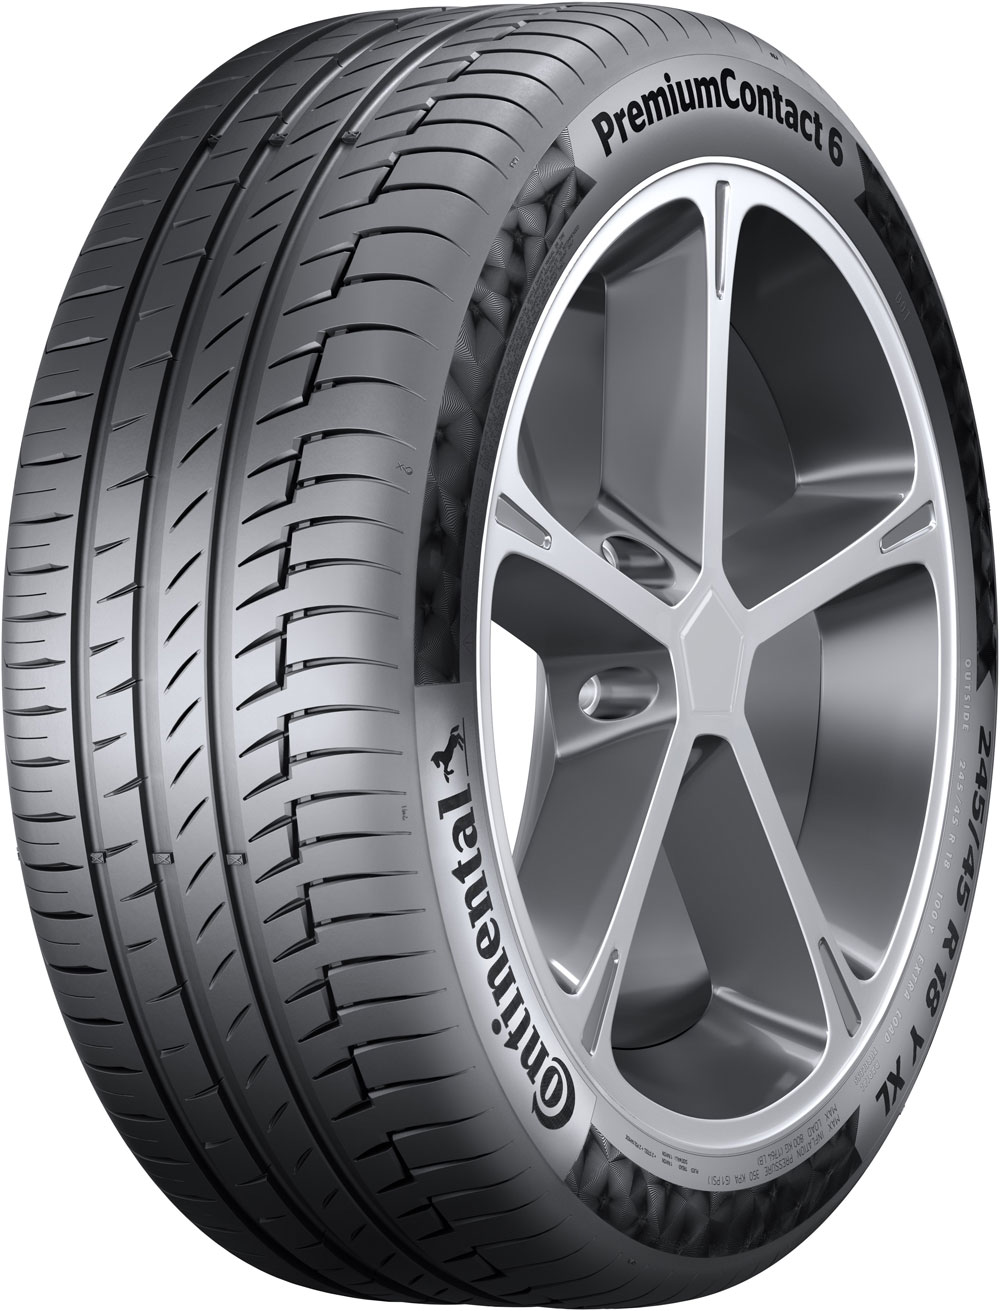 Anvelope auto CONTINENTAL PremiumContact 6 -V XL MERCEDES 235/55 R17 103W